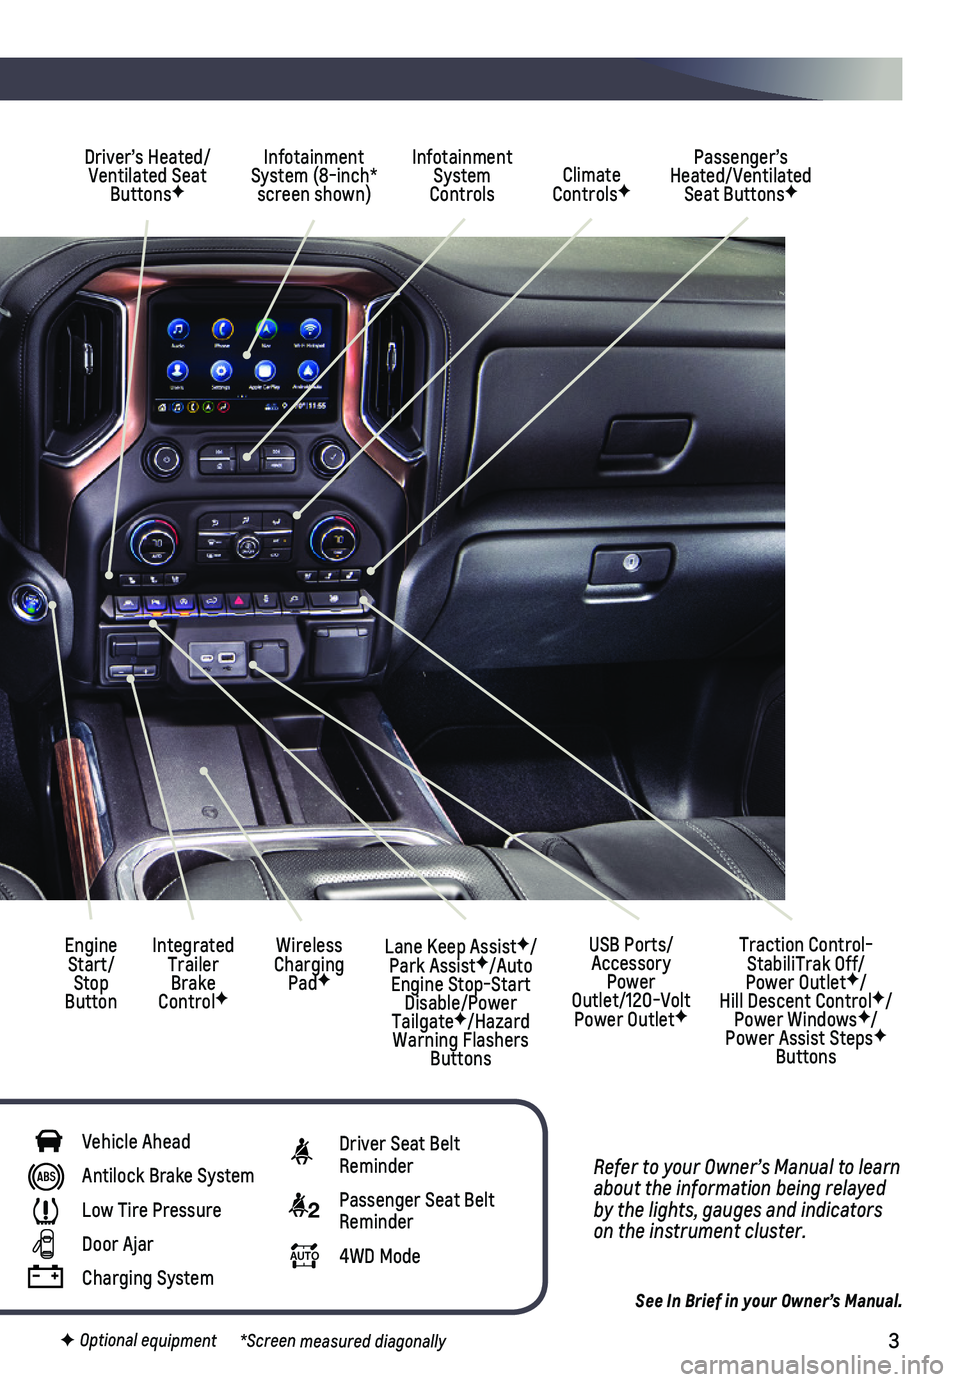 CHEVROLET SILVERADO 2019  Get To Know Guide 3
Refer to your Owner’s Manual to learn about the information being relayed by the lights, gauges and indicators on the instrument cluster.
See In Brief in your Owner’s Manual.
Driver’s Heated/V